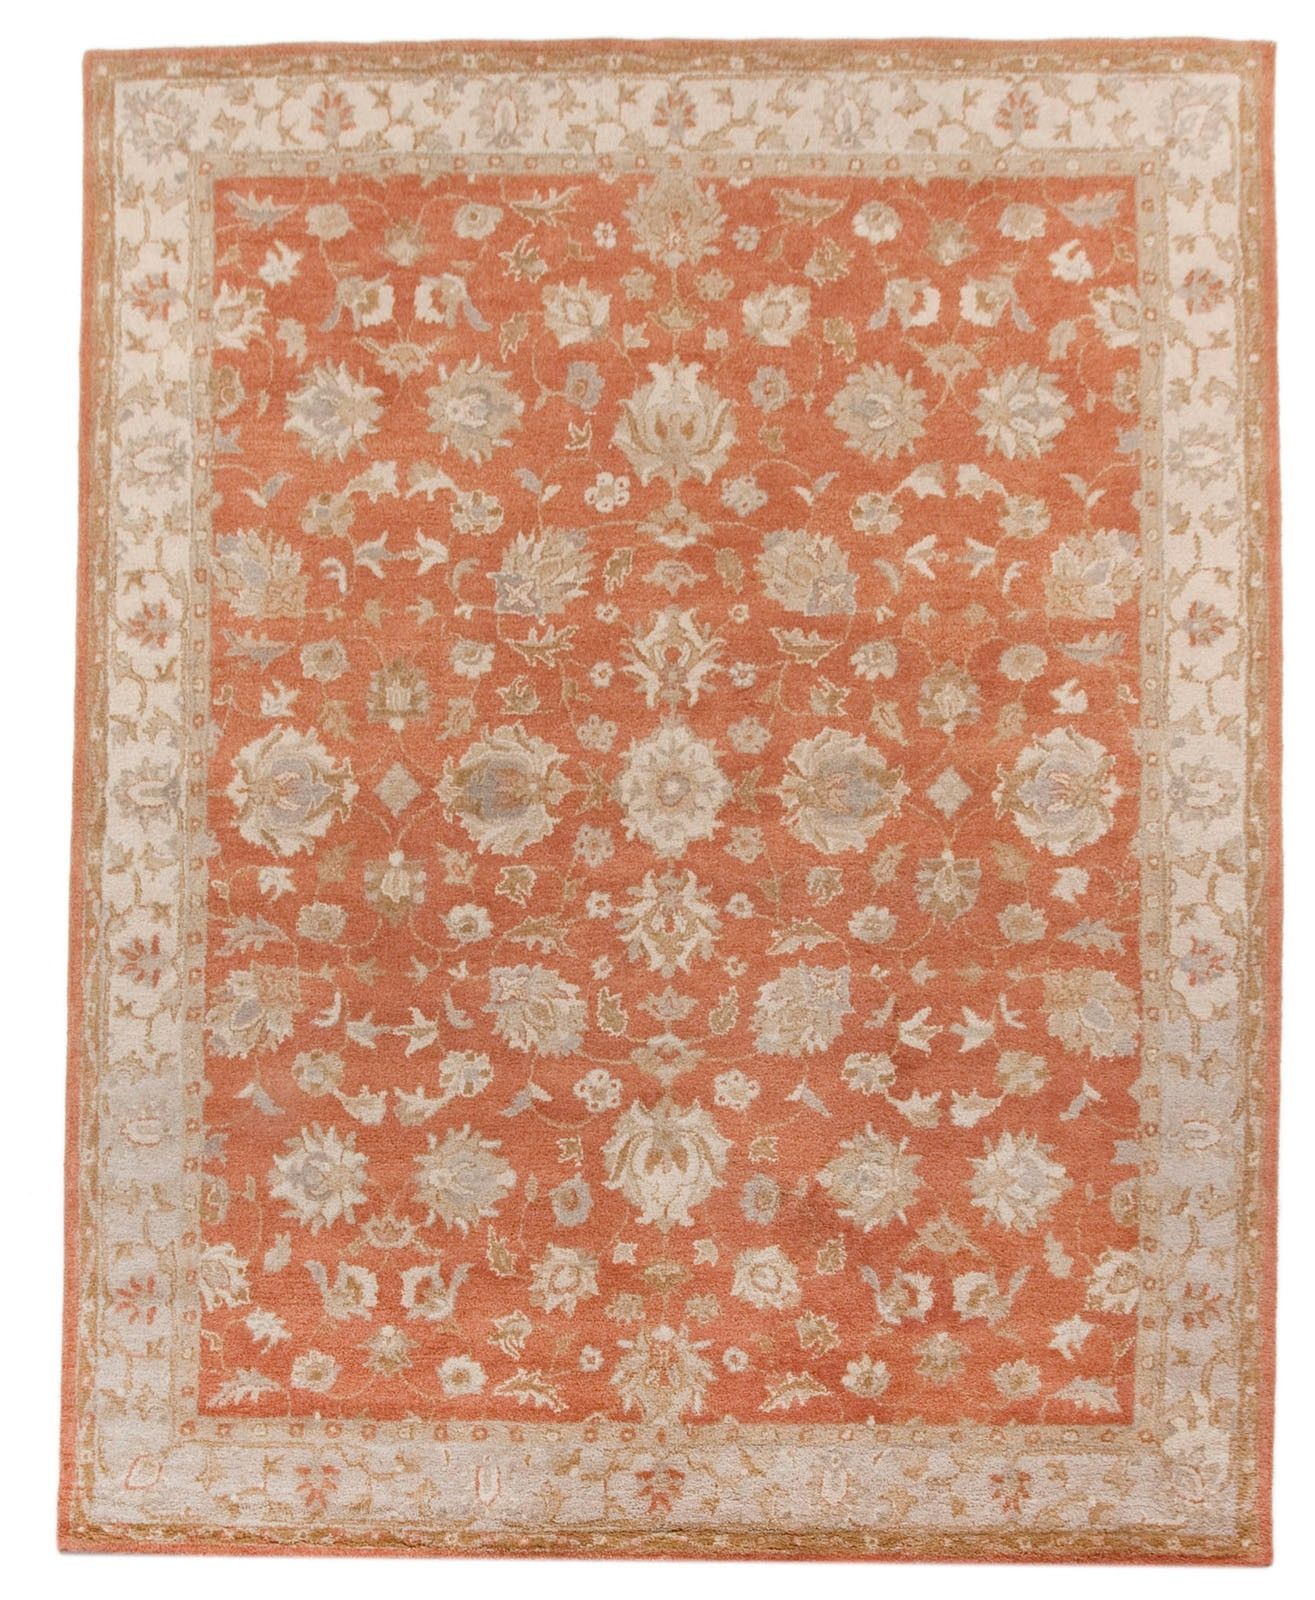 Area Rug 8×10 Wool Area Rugs 8 X 10 Pottery Barn Best Rugs Pertaining To 8×10 Wool Area Rugs (View 12 of 15)